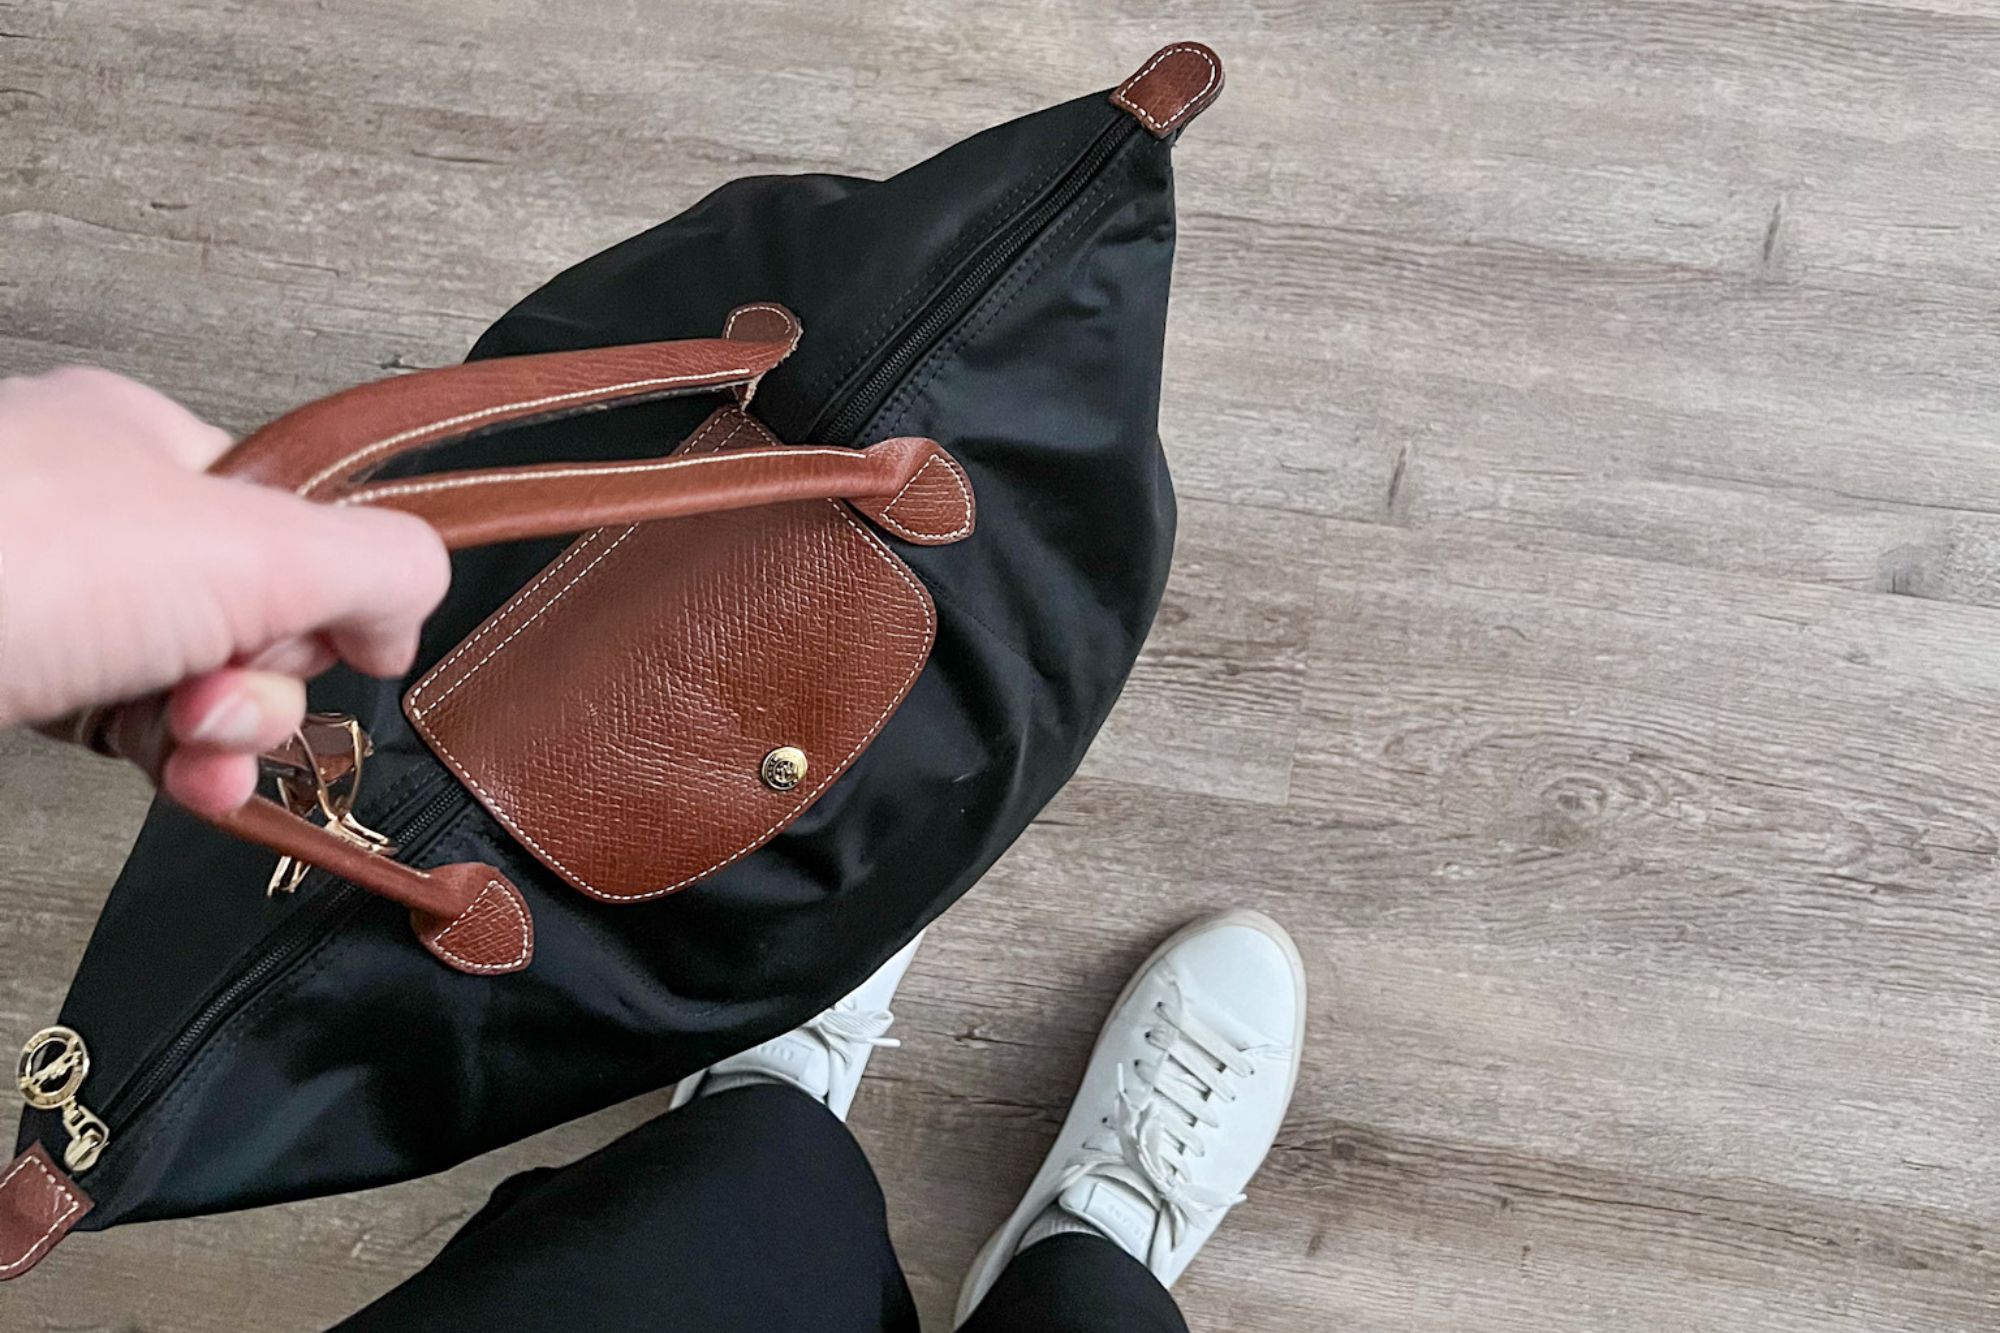 Longchamp Le Pliage Cosmetic Case - thoughts? Useful? Gimmick? : r/handbags